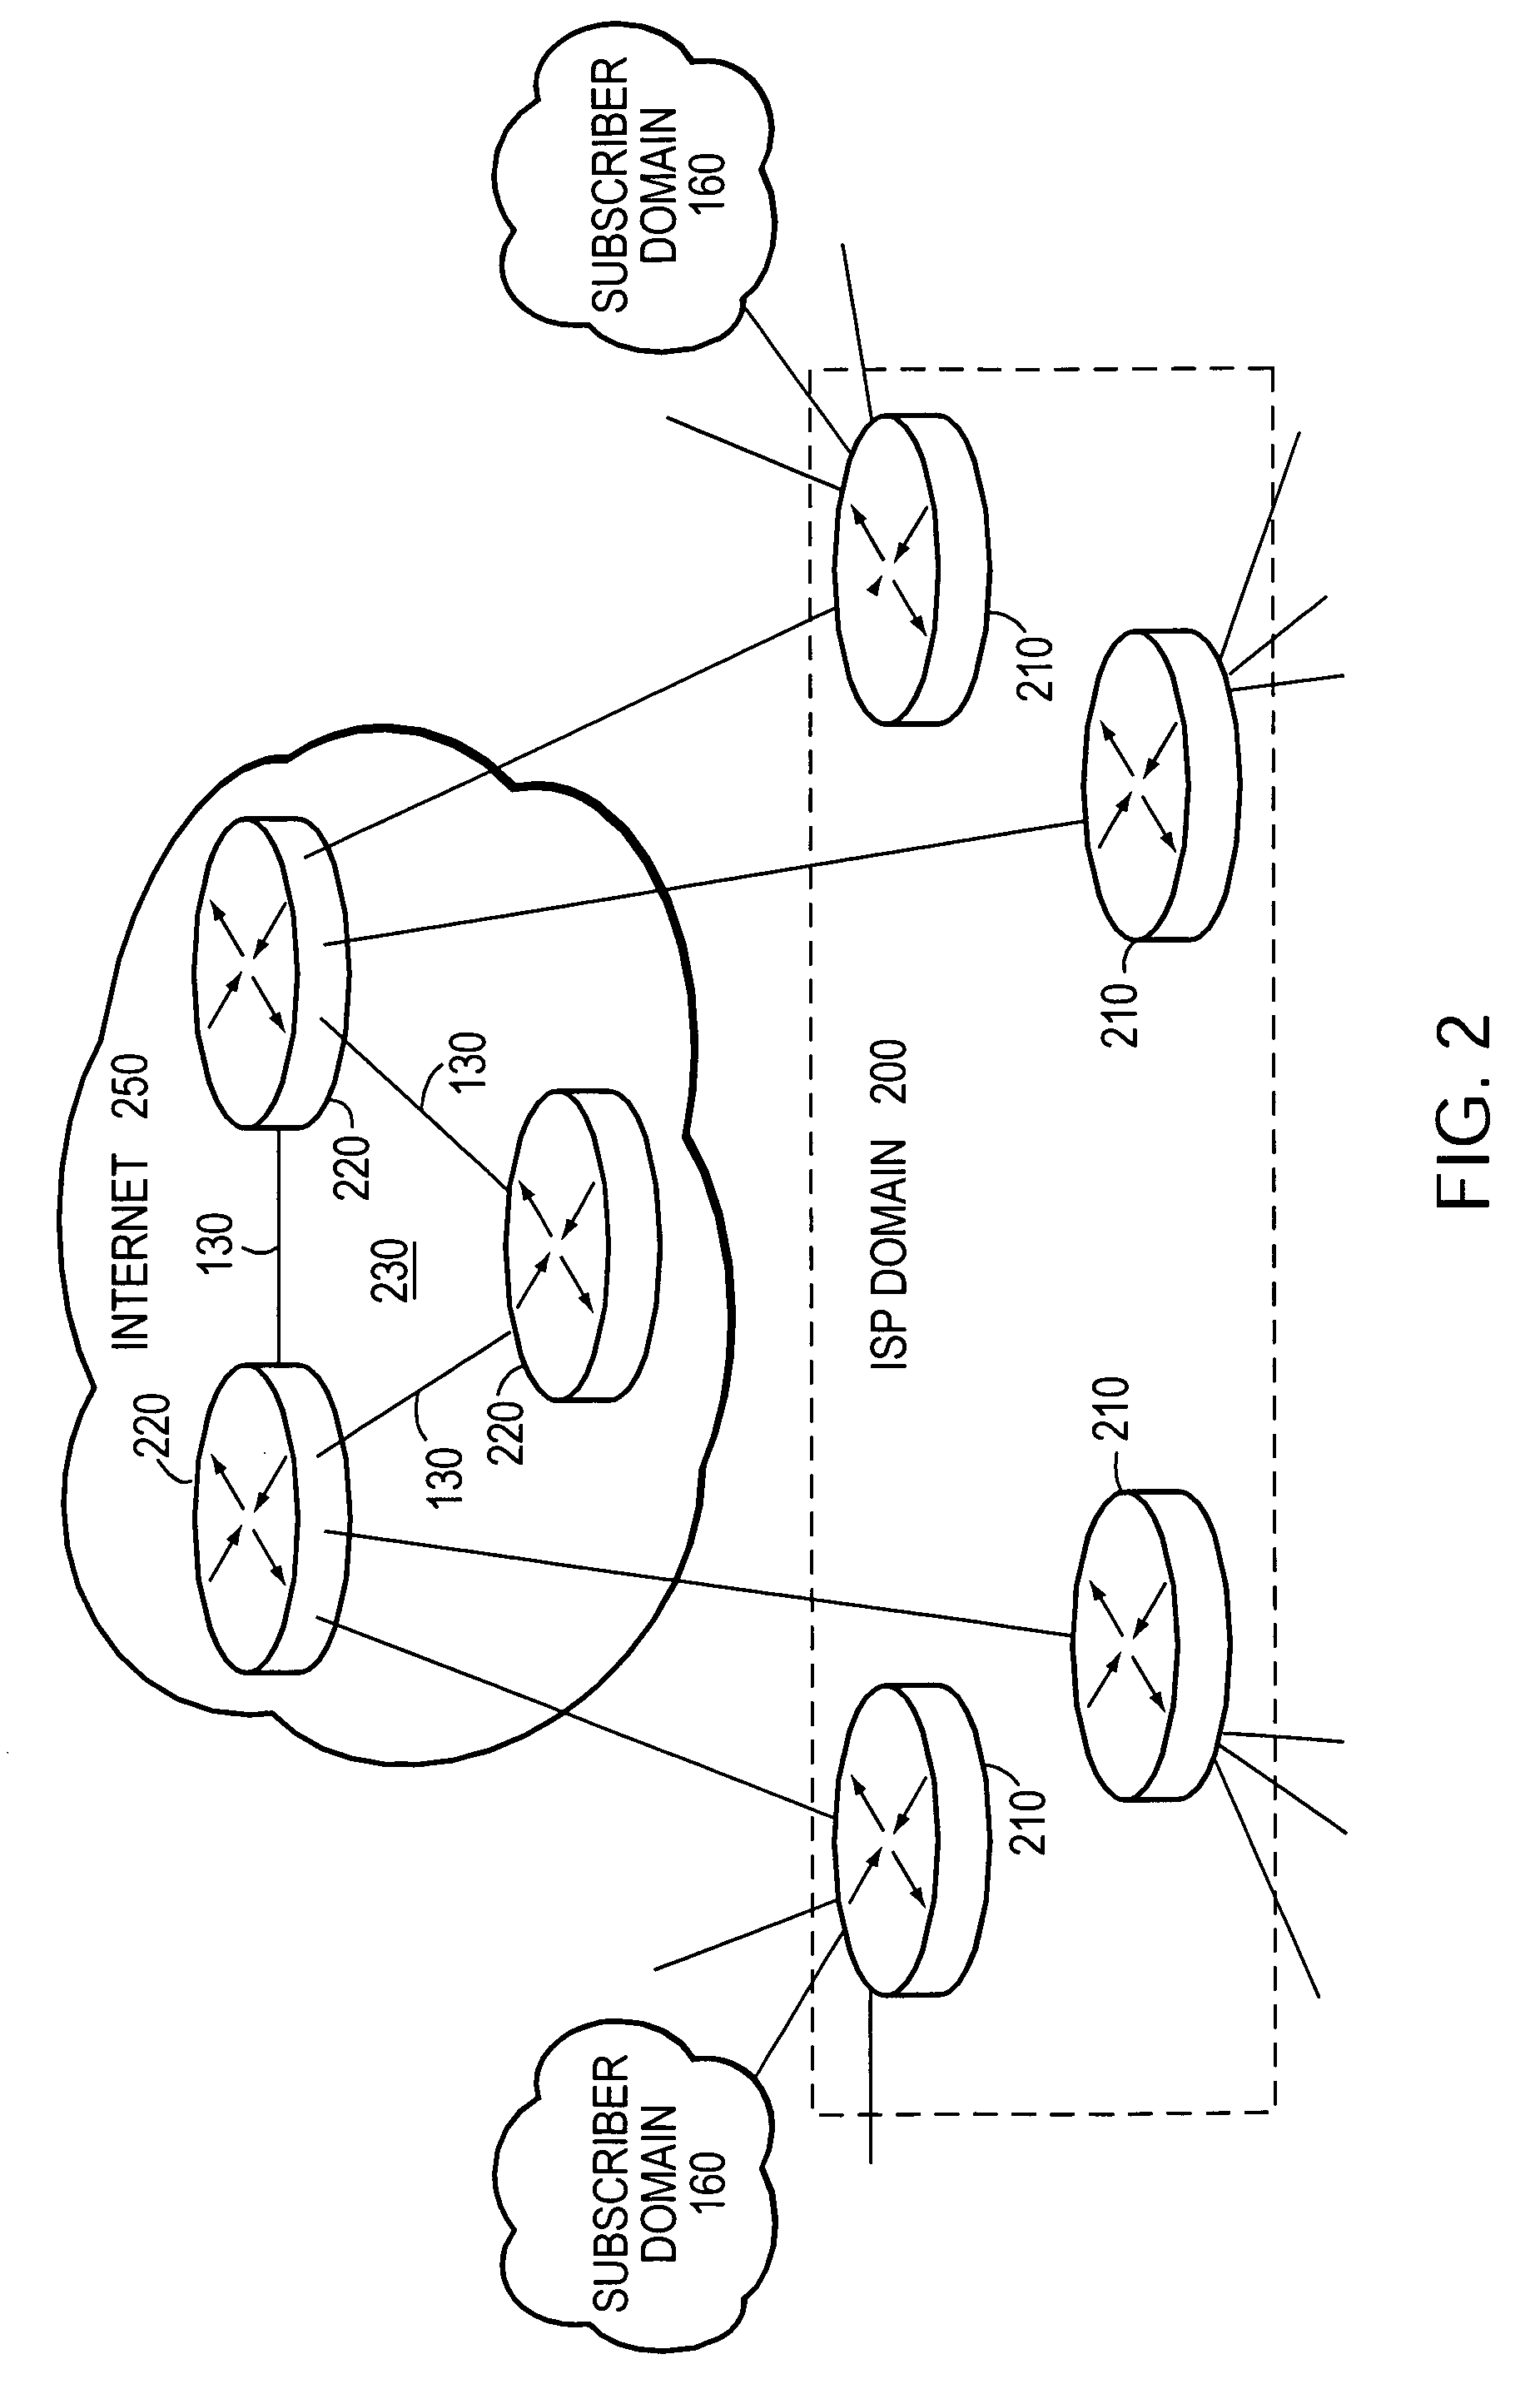 Automatic protection switching line card redundancy within an intermediate network node